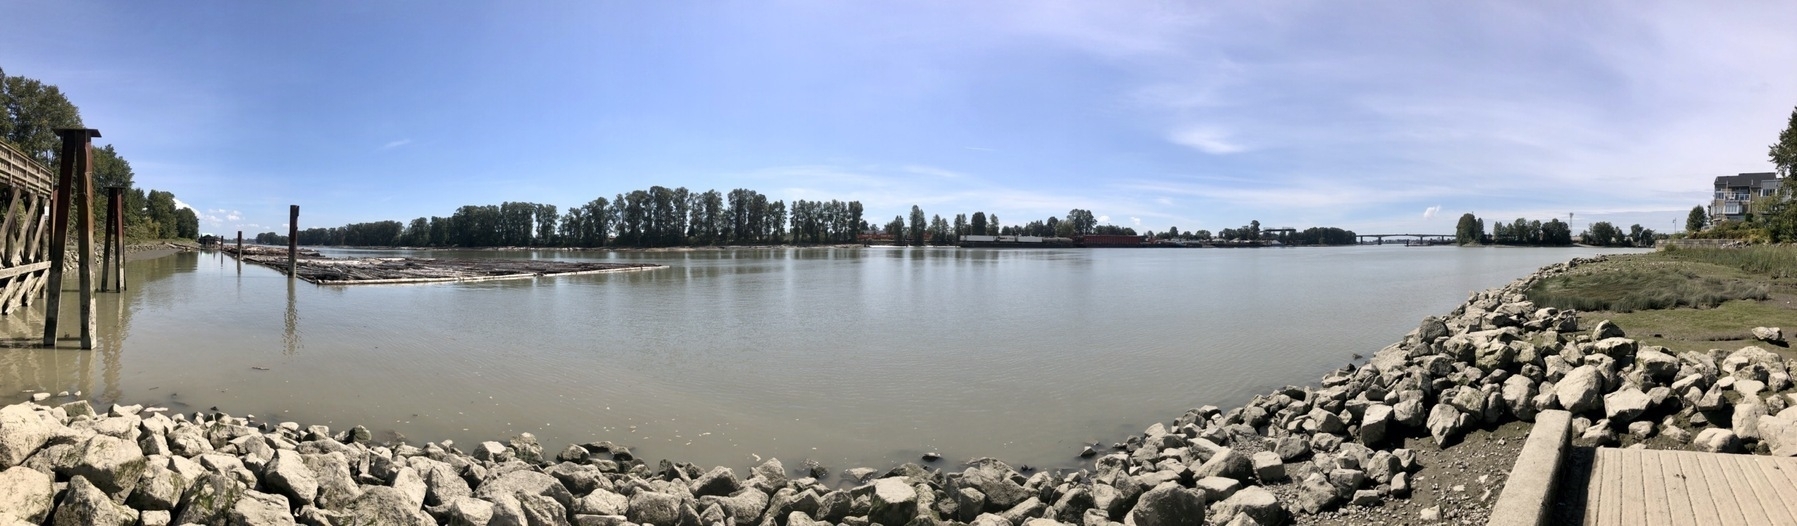 Panorama at Gladstone-Riverside Park, Vancouver - looking at Fraser River